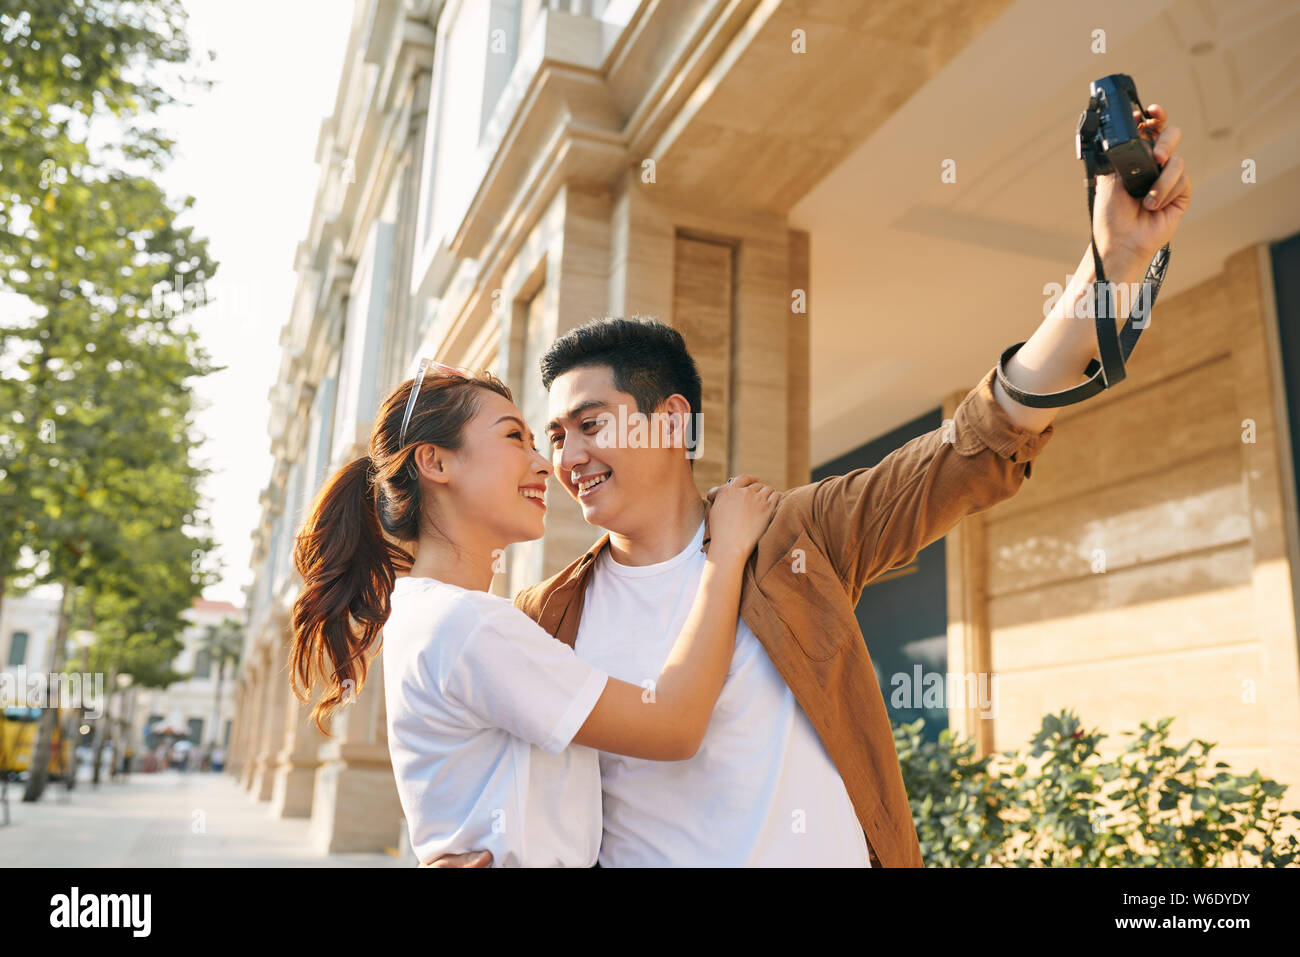 Happy tourists taking photo of themselves Stock Photo